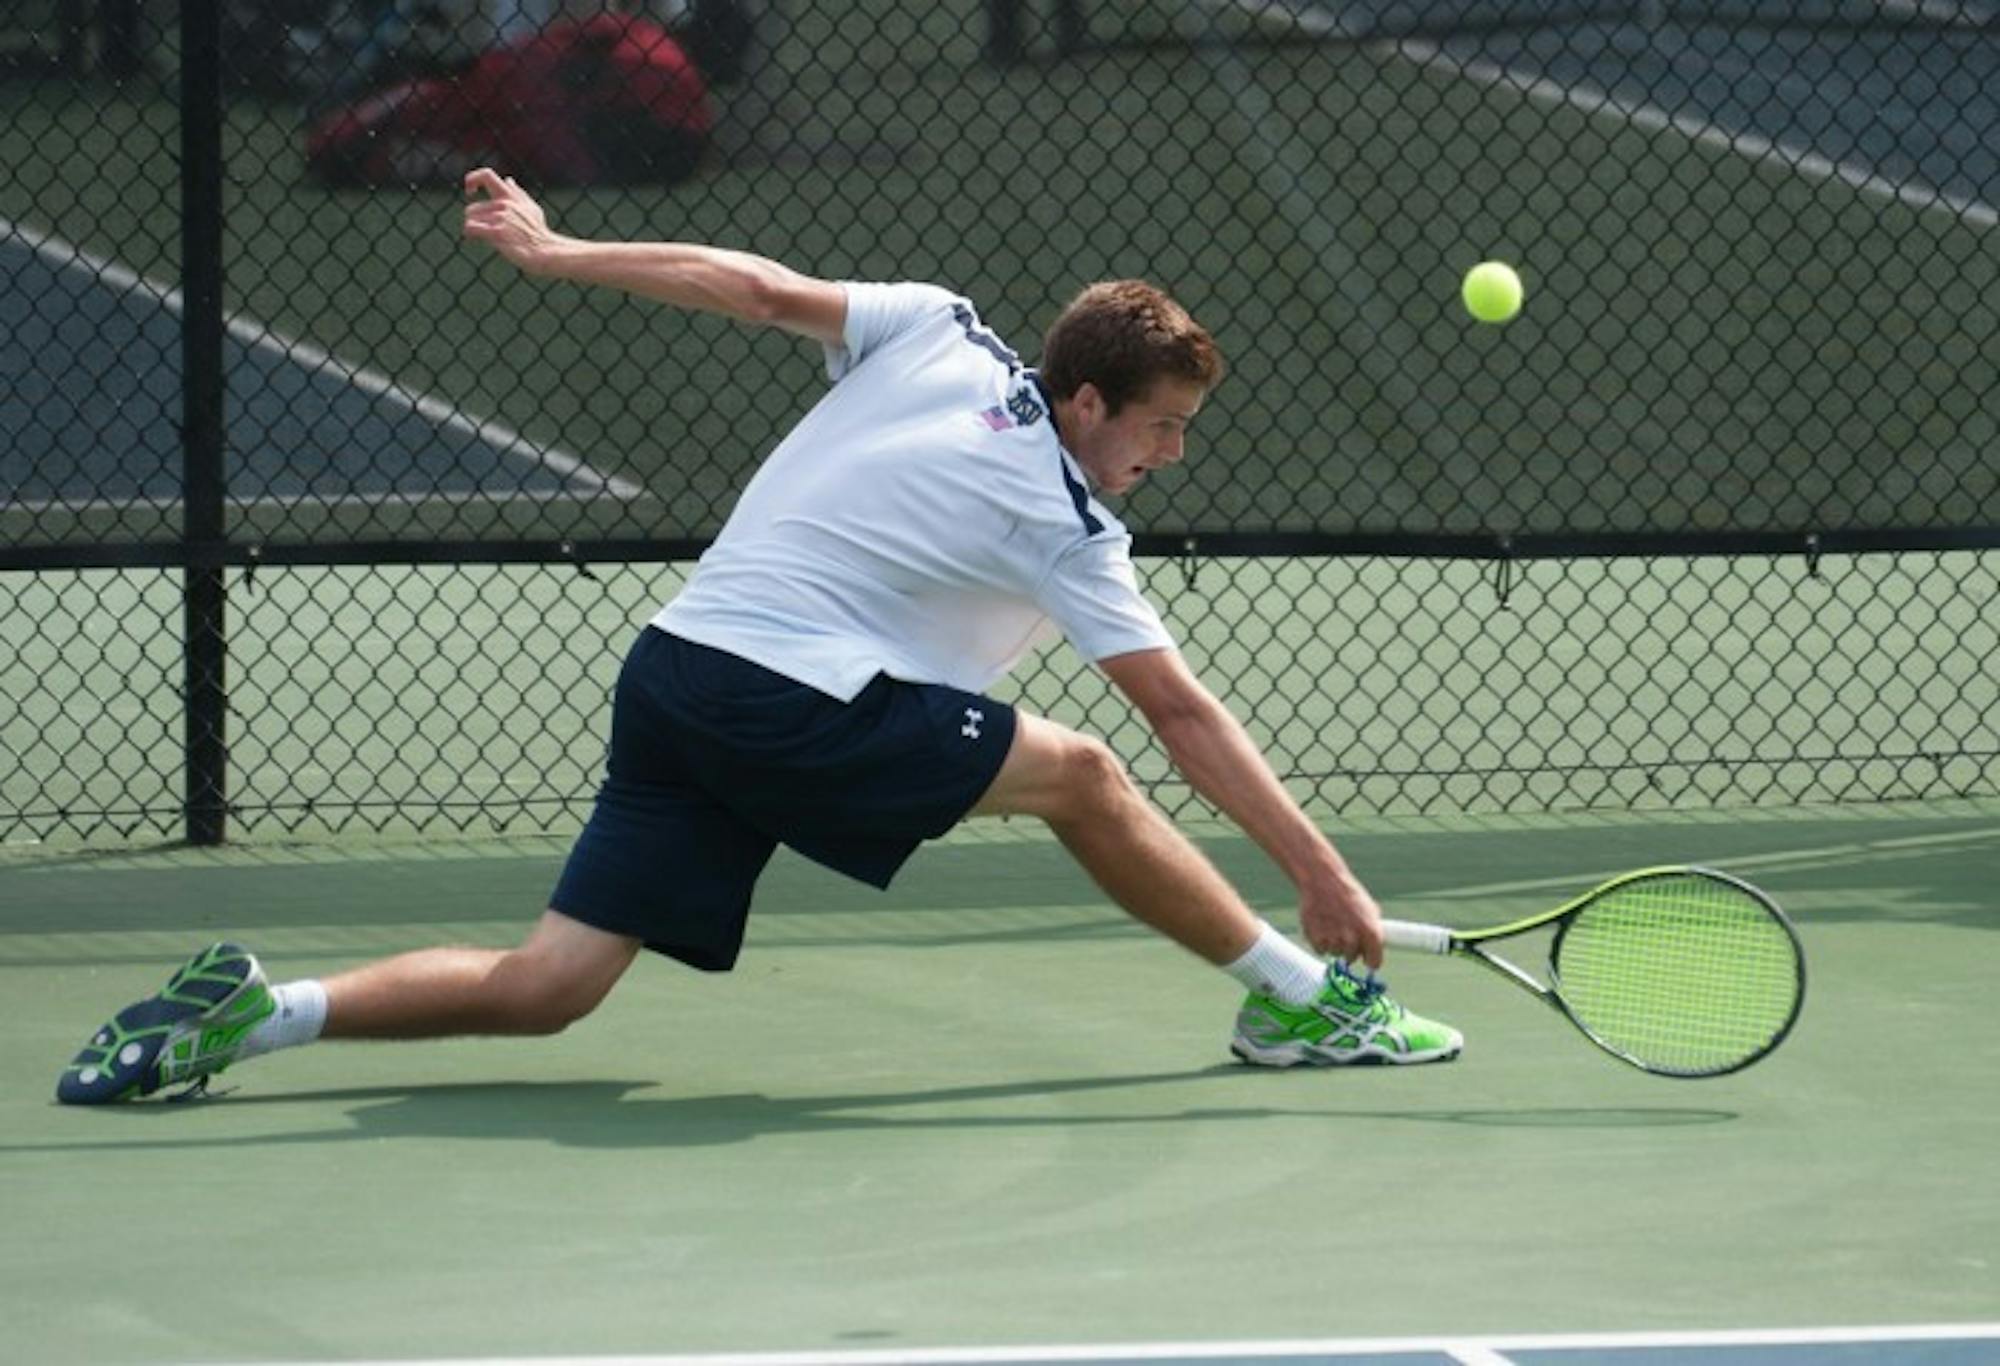 Irish senior Quentin Monaghan stretches out for a backhand shot during a match against North Carolina State on April 18 at Eck Tennis Pavilion. The Irish won the match 4-3.